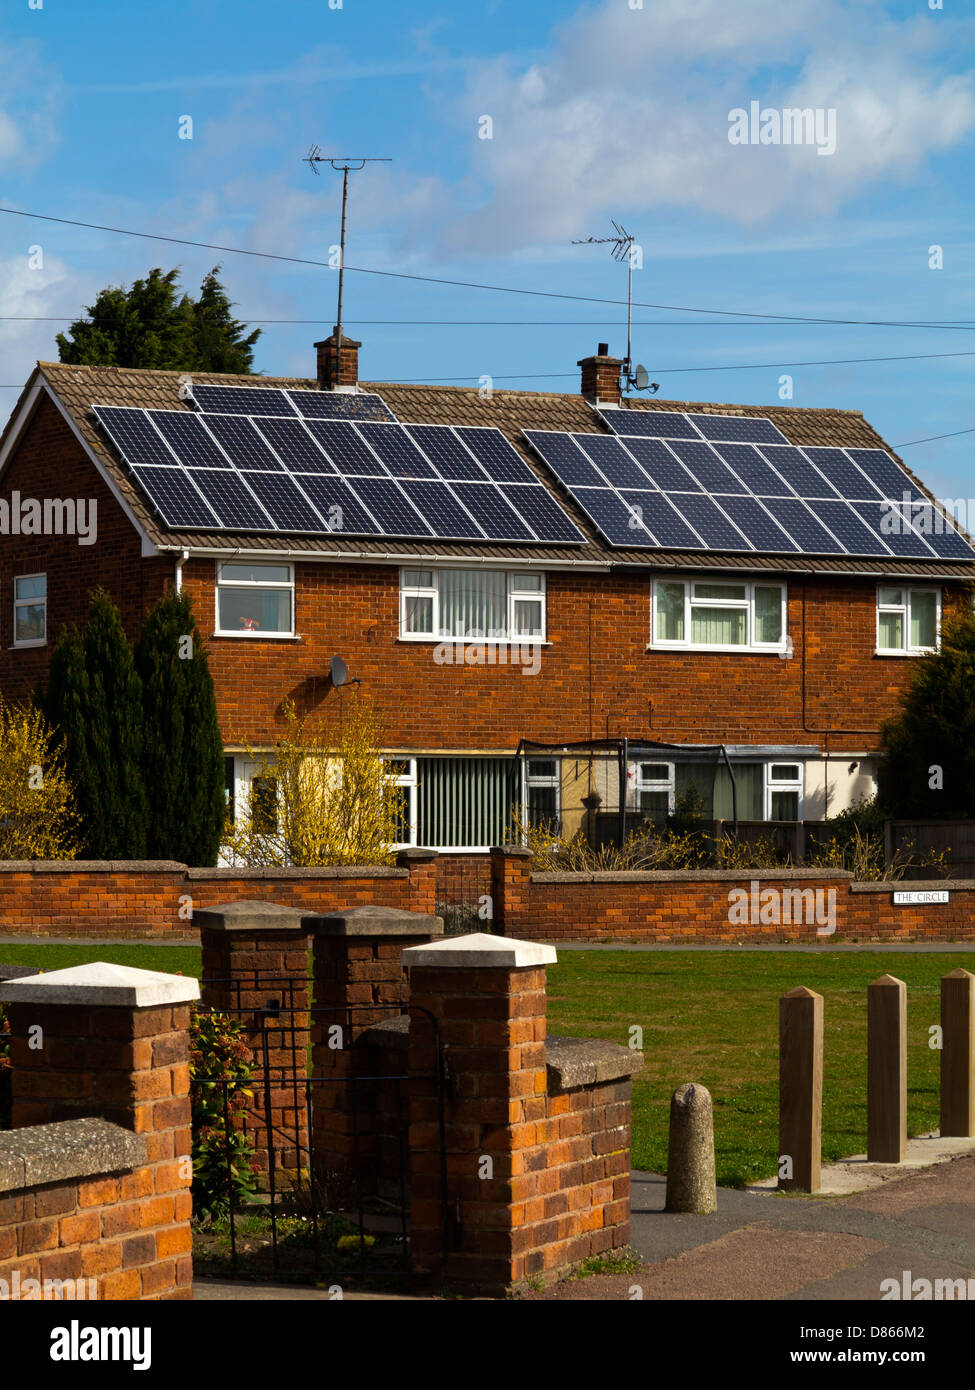 Photo Voltaic solar panels on roof of semi detached houses in Clipstone village Nottinghamshire England UK Stock Photo